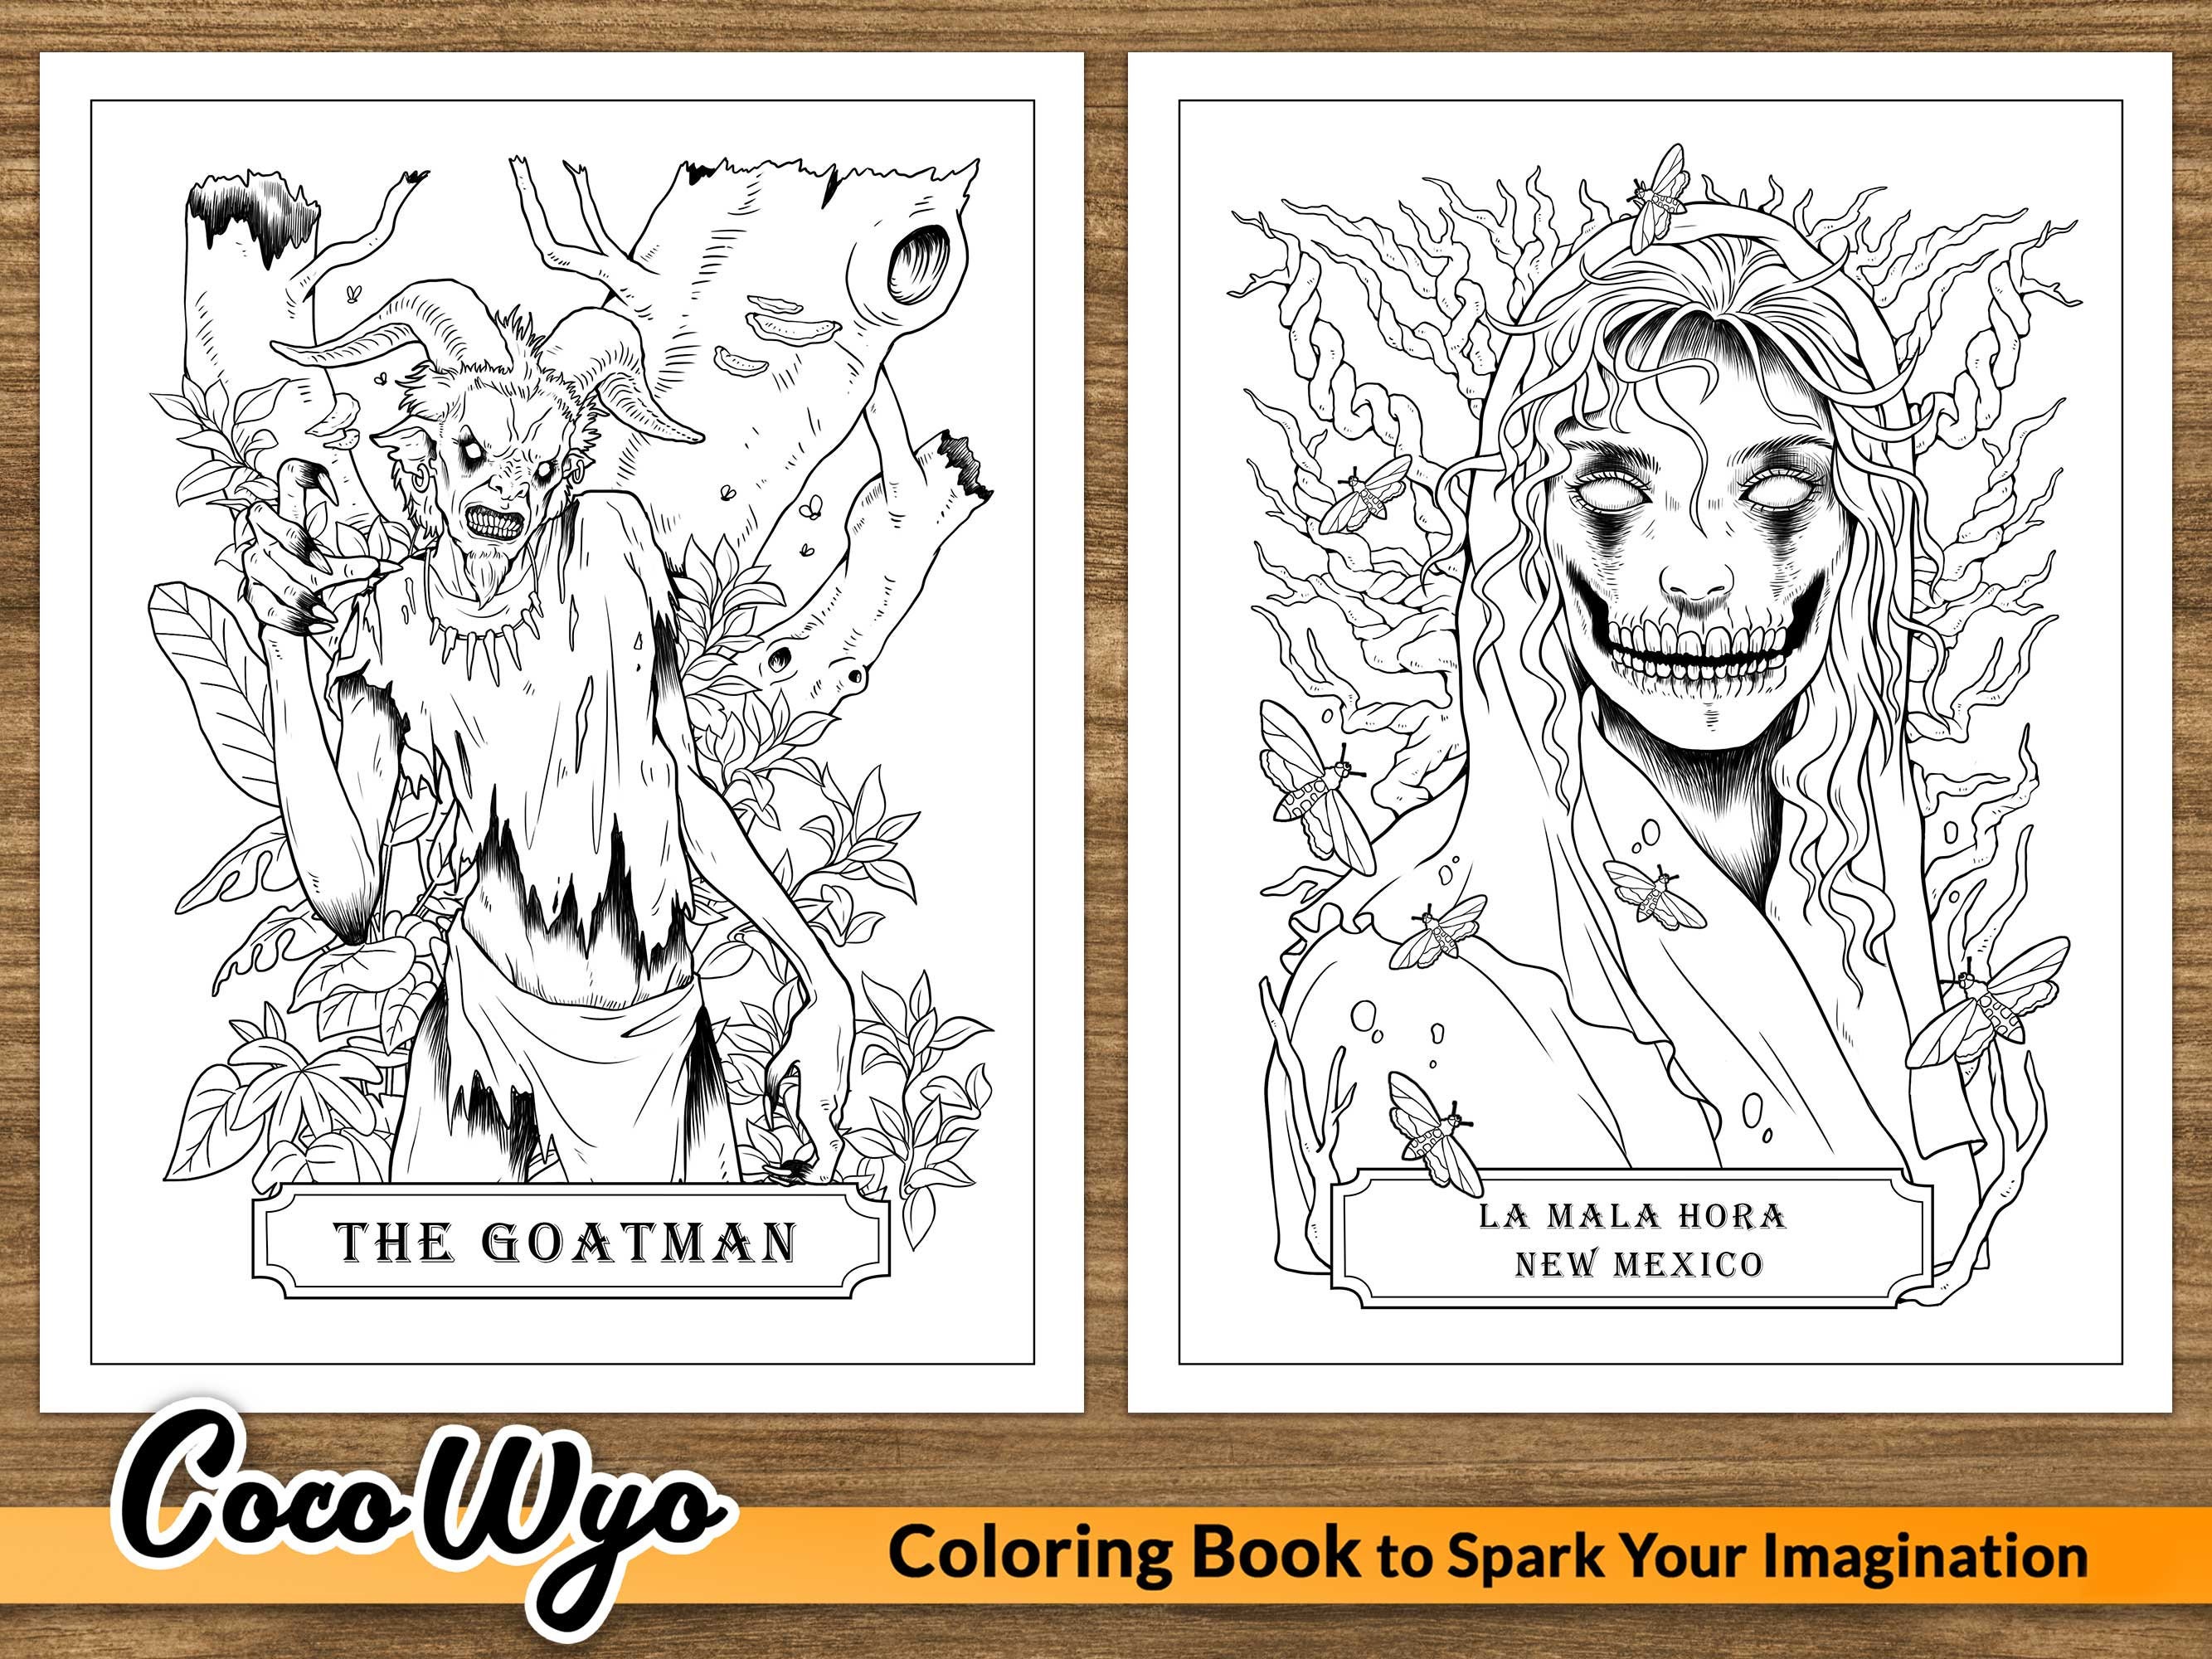 Haunted Nightmare: A Spooky Coloring Book for Adults – Rogue + Wolf